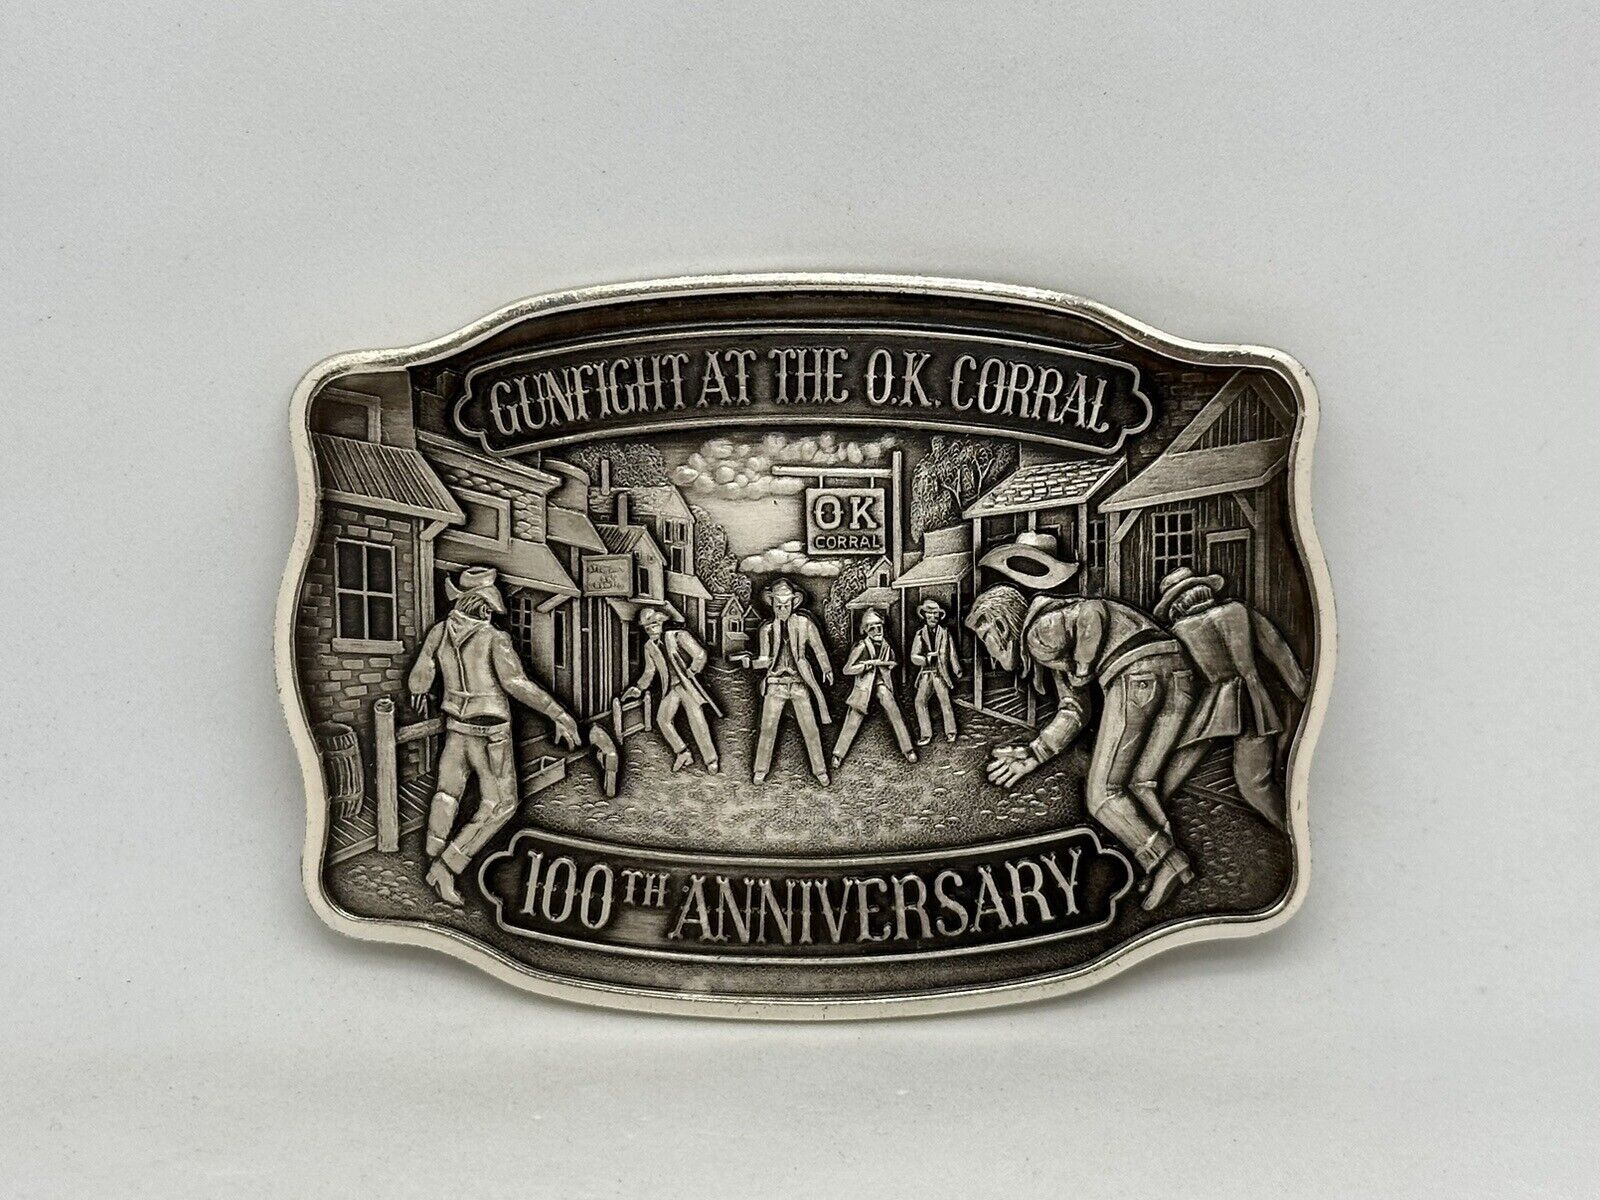 Gunfight At The O.K. Corral 100th Anniversary 168gr Solid Sterling Silver Buckle